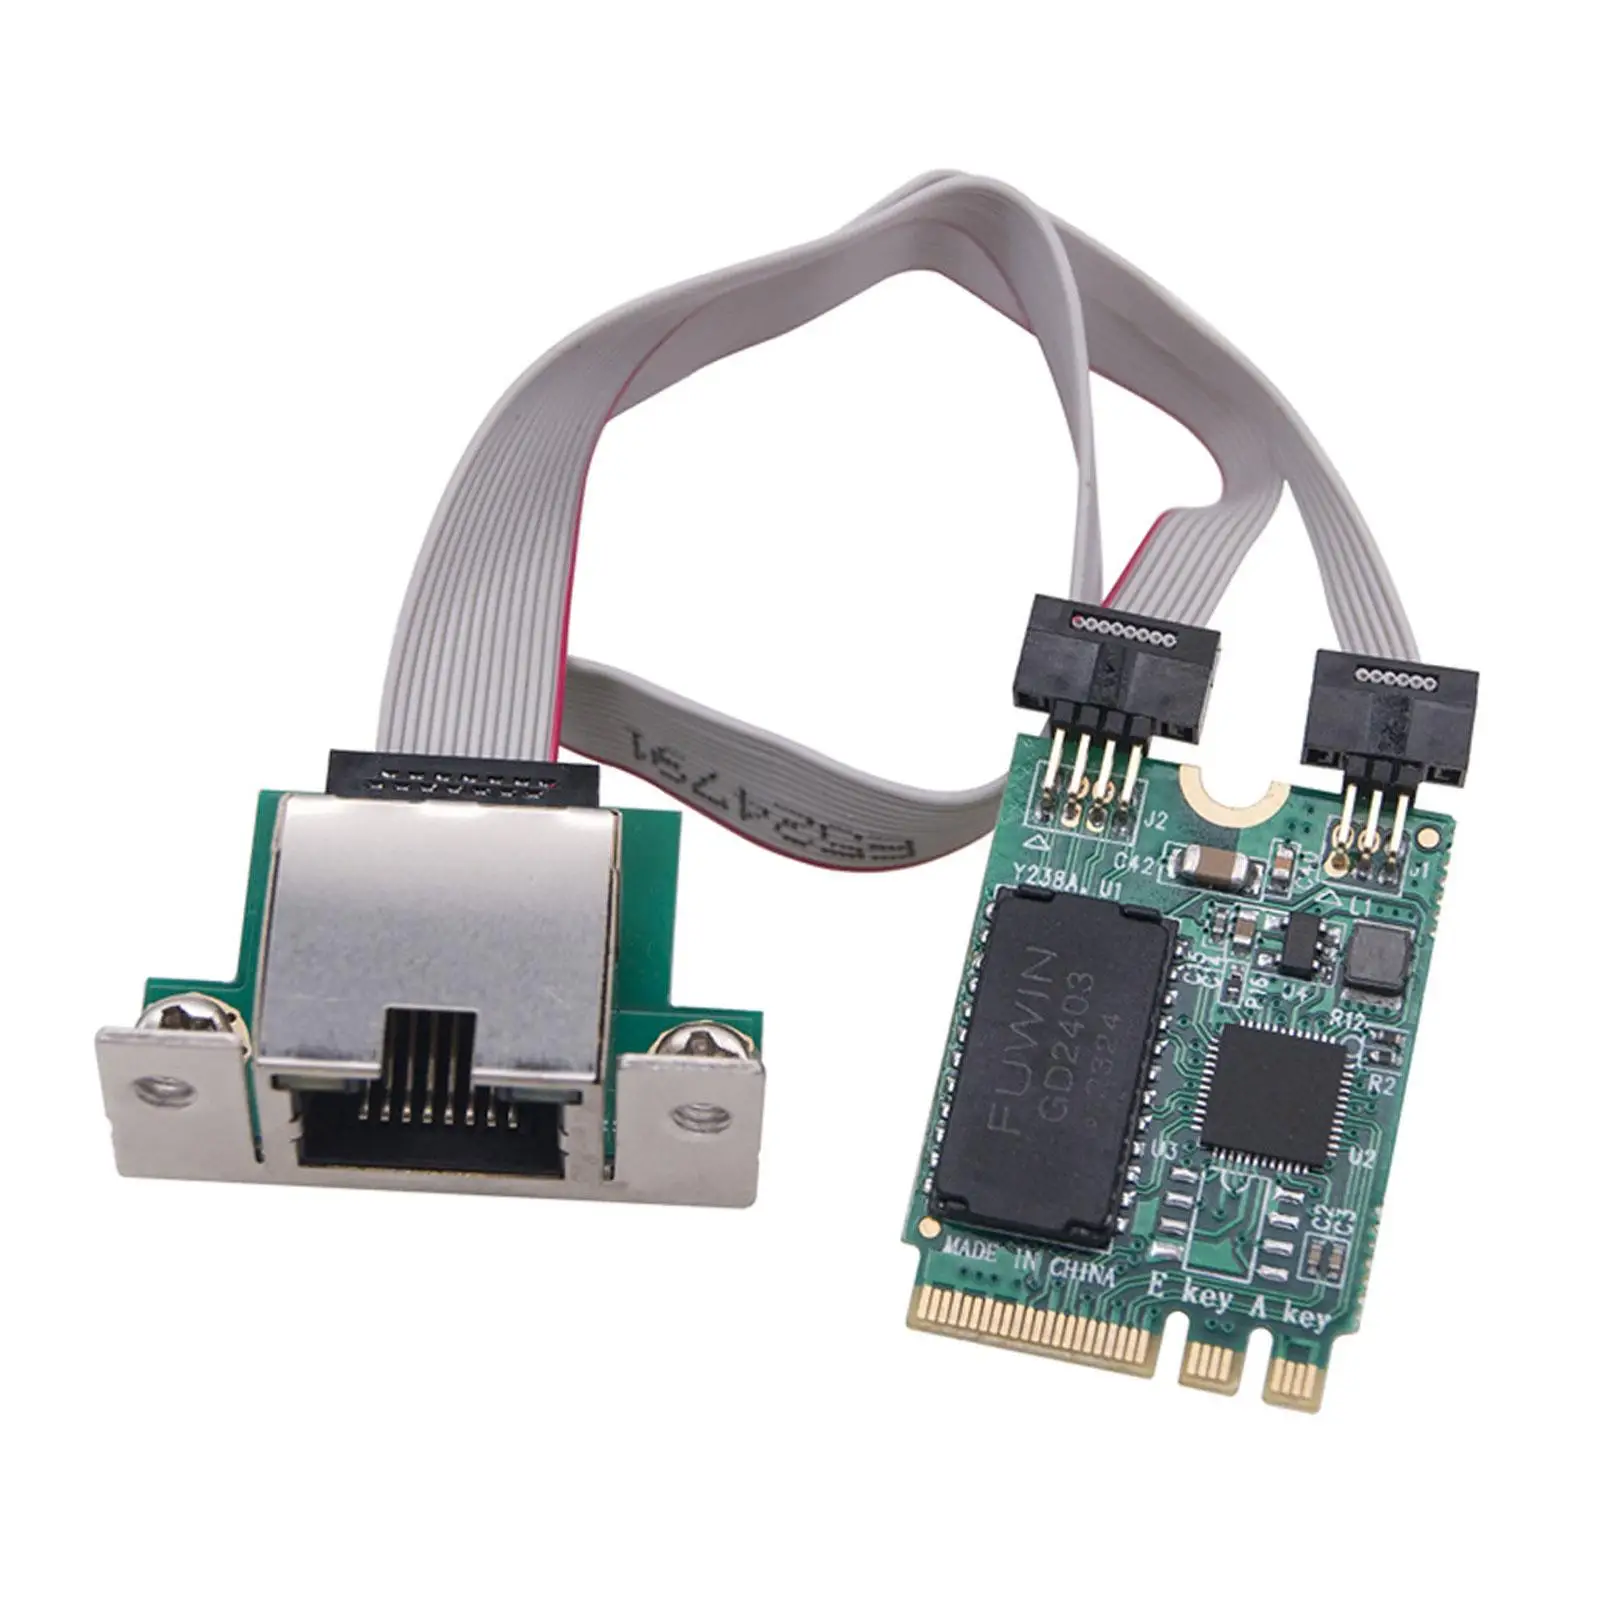 Network Card 10/100/1000/2500Mbps with 1 Port LAN Controller Card Easily Installation Server Ethernet Card